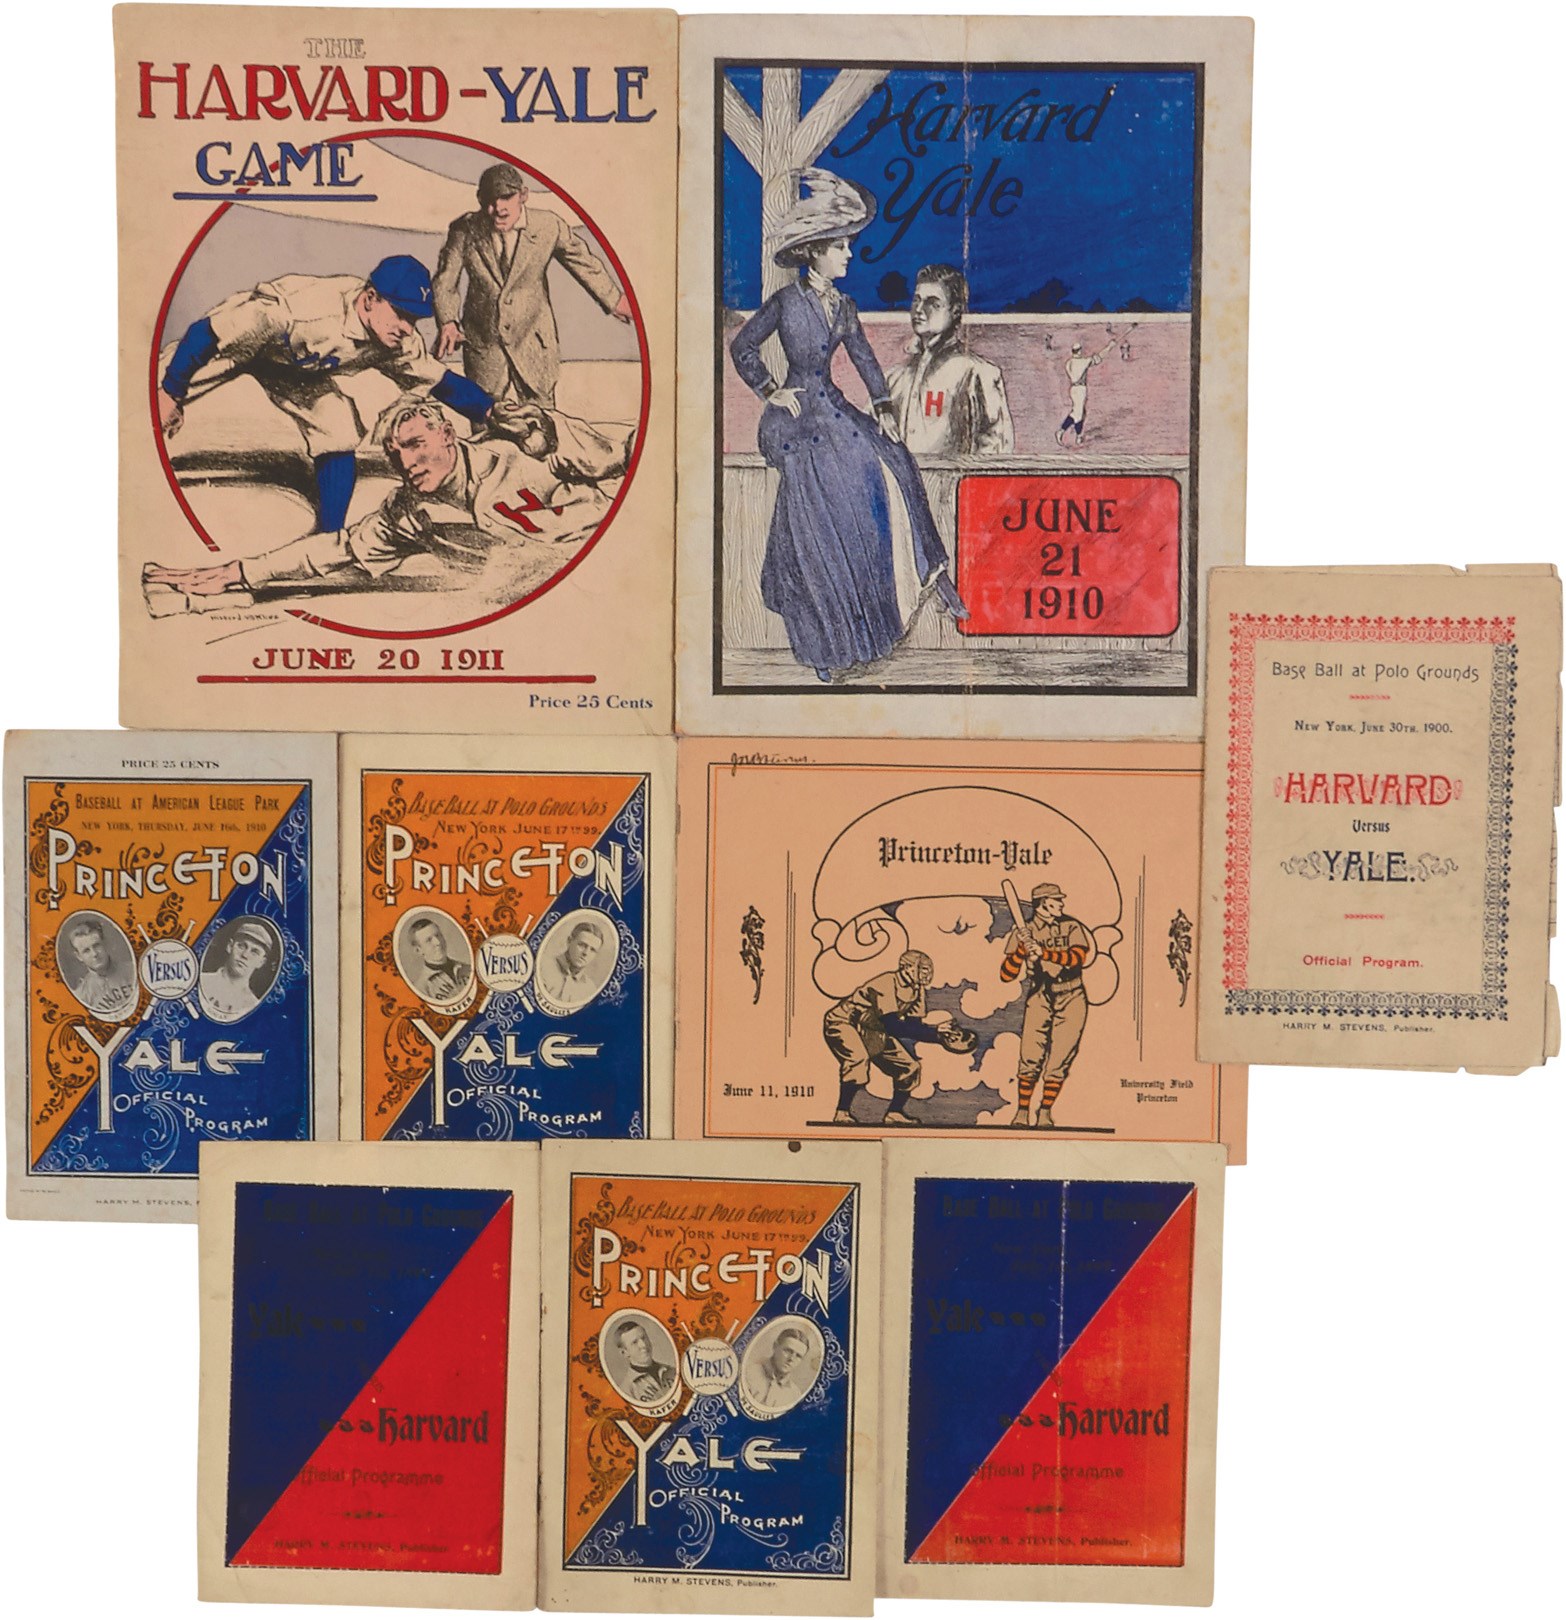 The Ivy League And Collegiate Program Archive - 1899-1910 Harvard/Princeton vs. Yale Baseball Program Collection (9)